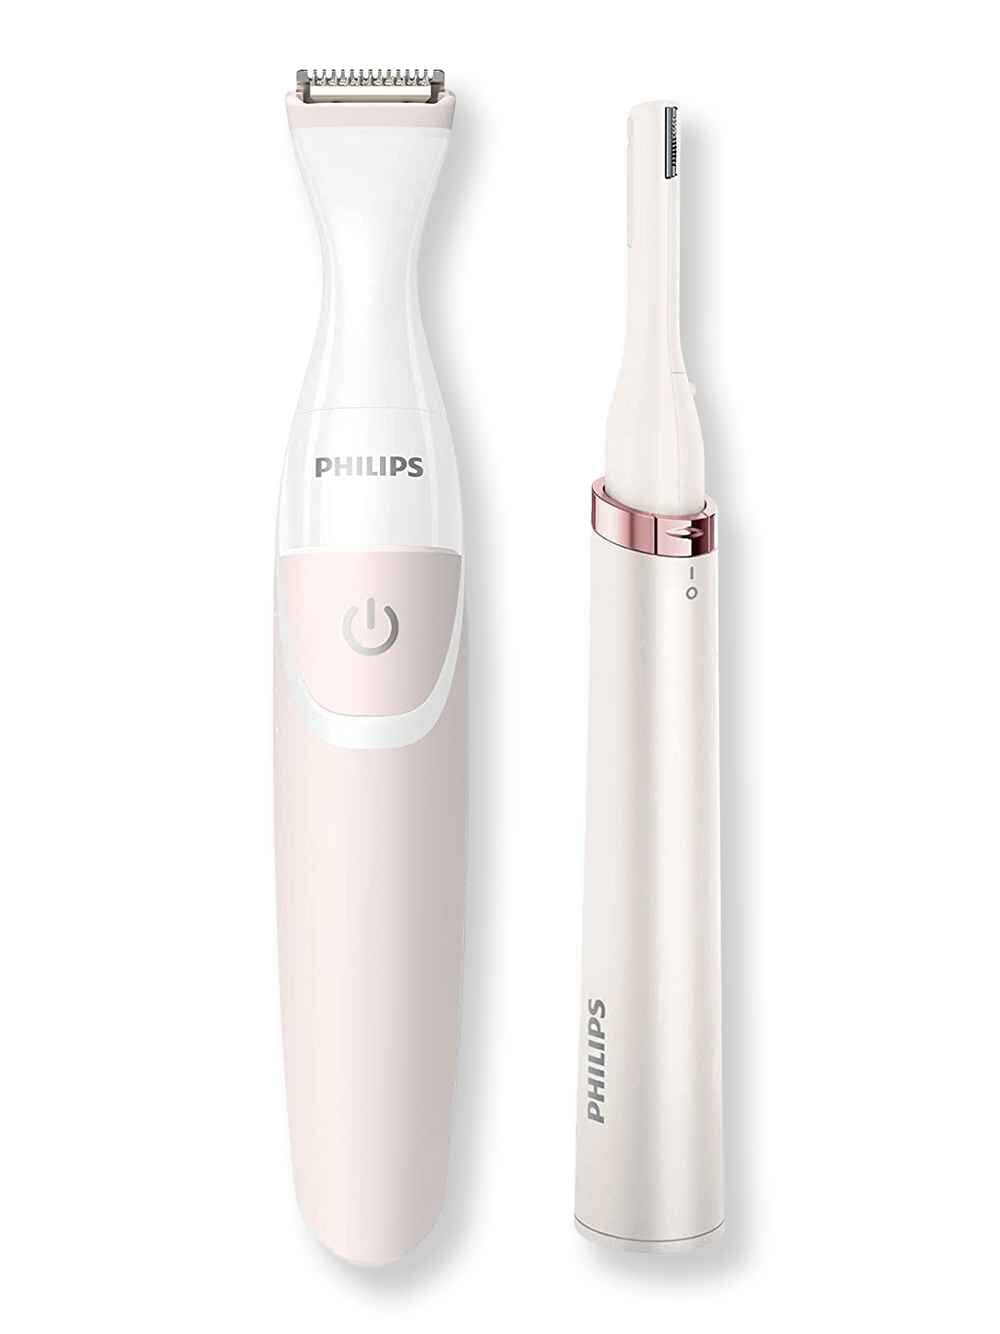 Philips Norelco Philips Norelco Women's Bikini Trimmer & Precision Trimmer Special Edition Kit Razors, Blades, & Trimmers 